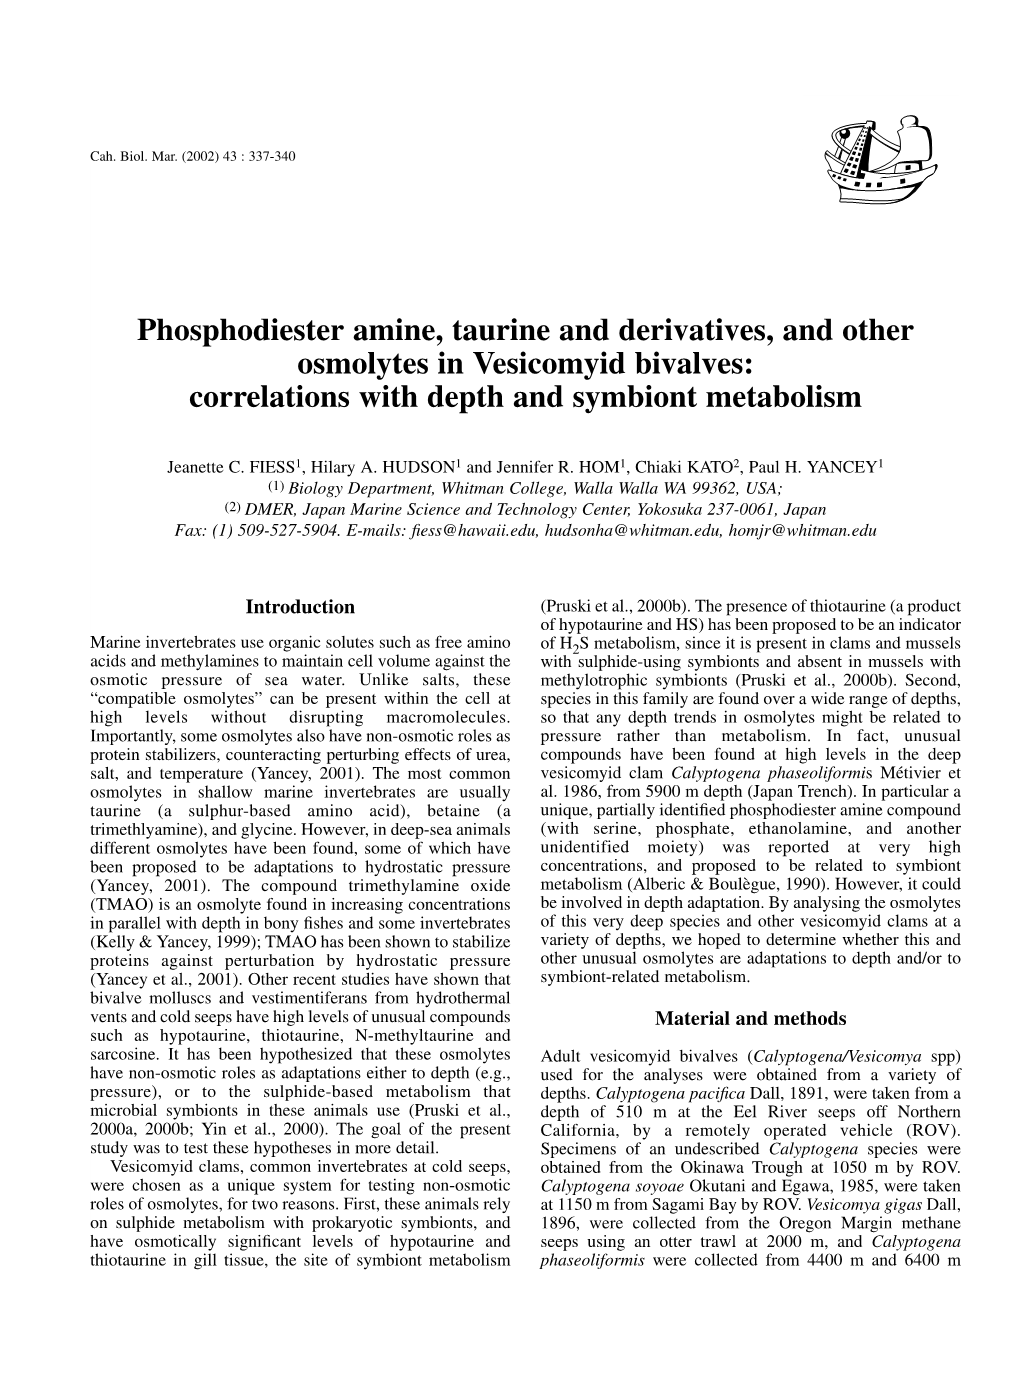 Phosphodiester Amine, Taurine and Derivatives, and Other Osmolytes in Vesicomyid Bivalves: Correlations with Depth and Symbiont Metabolism